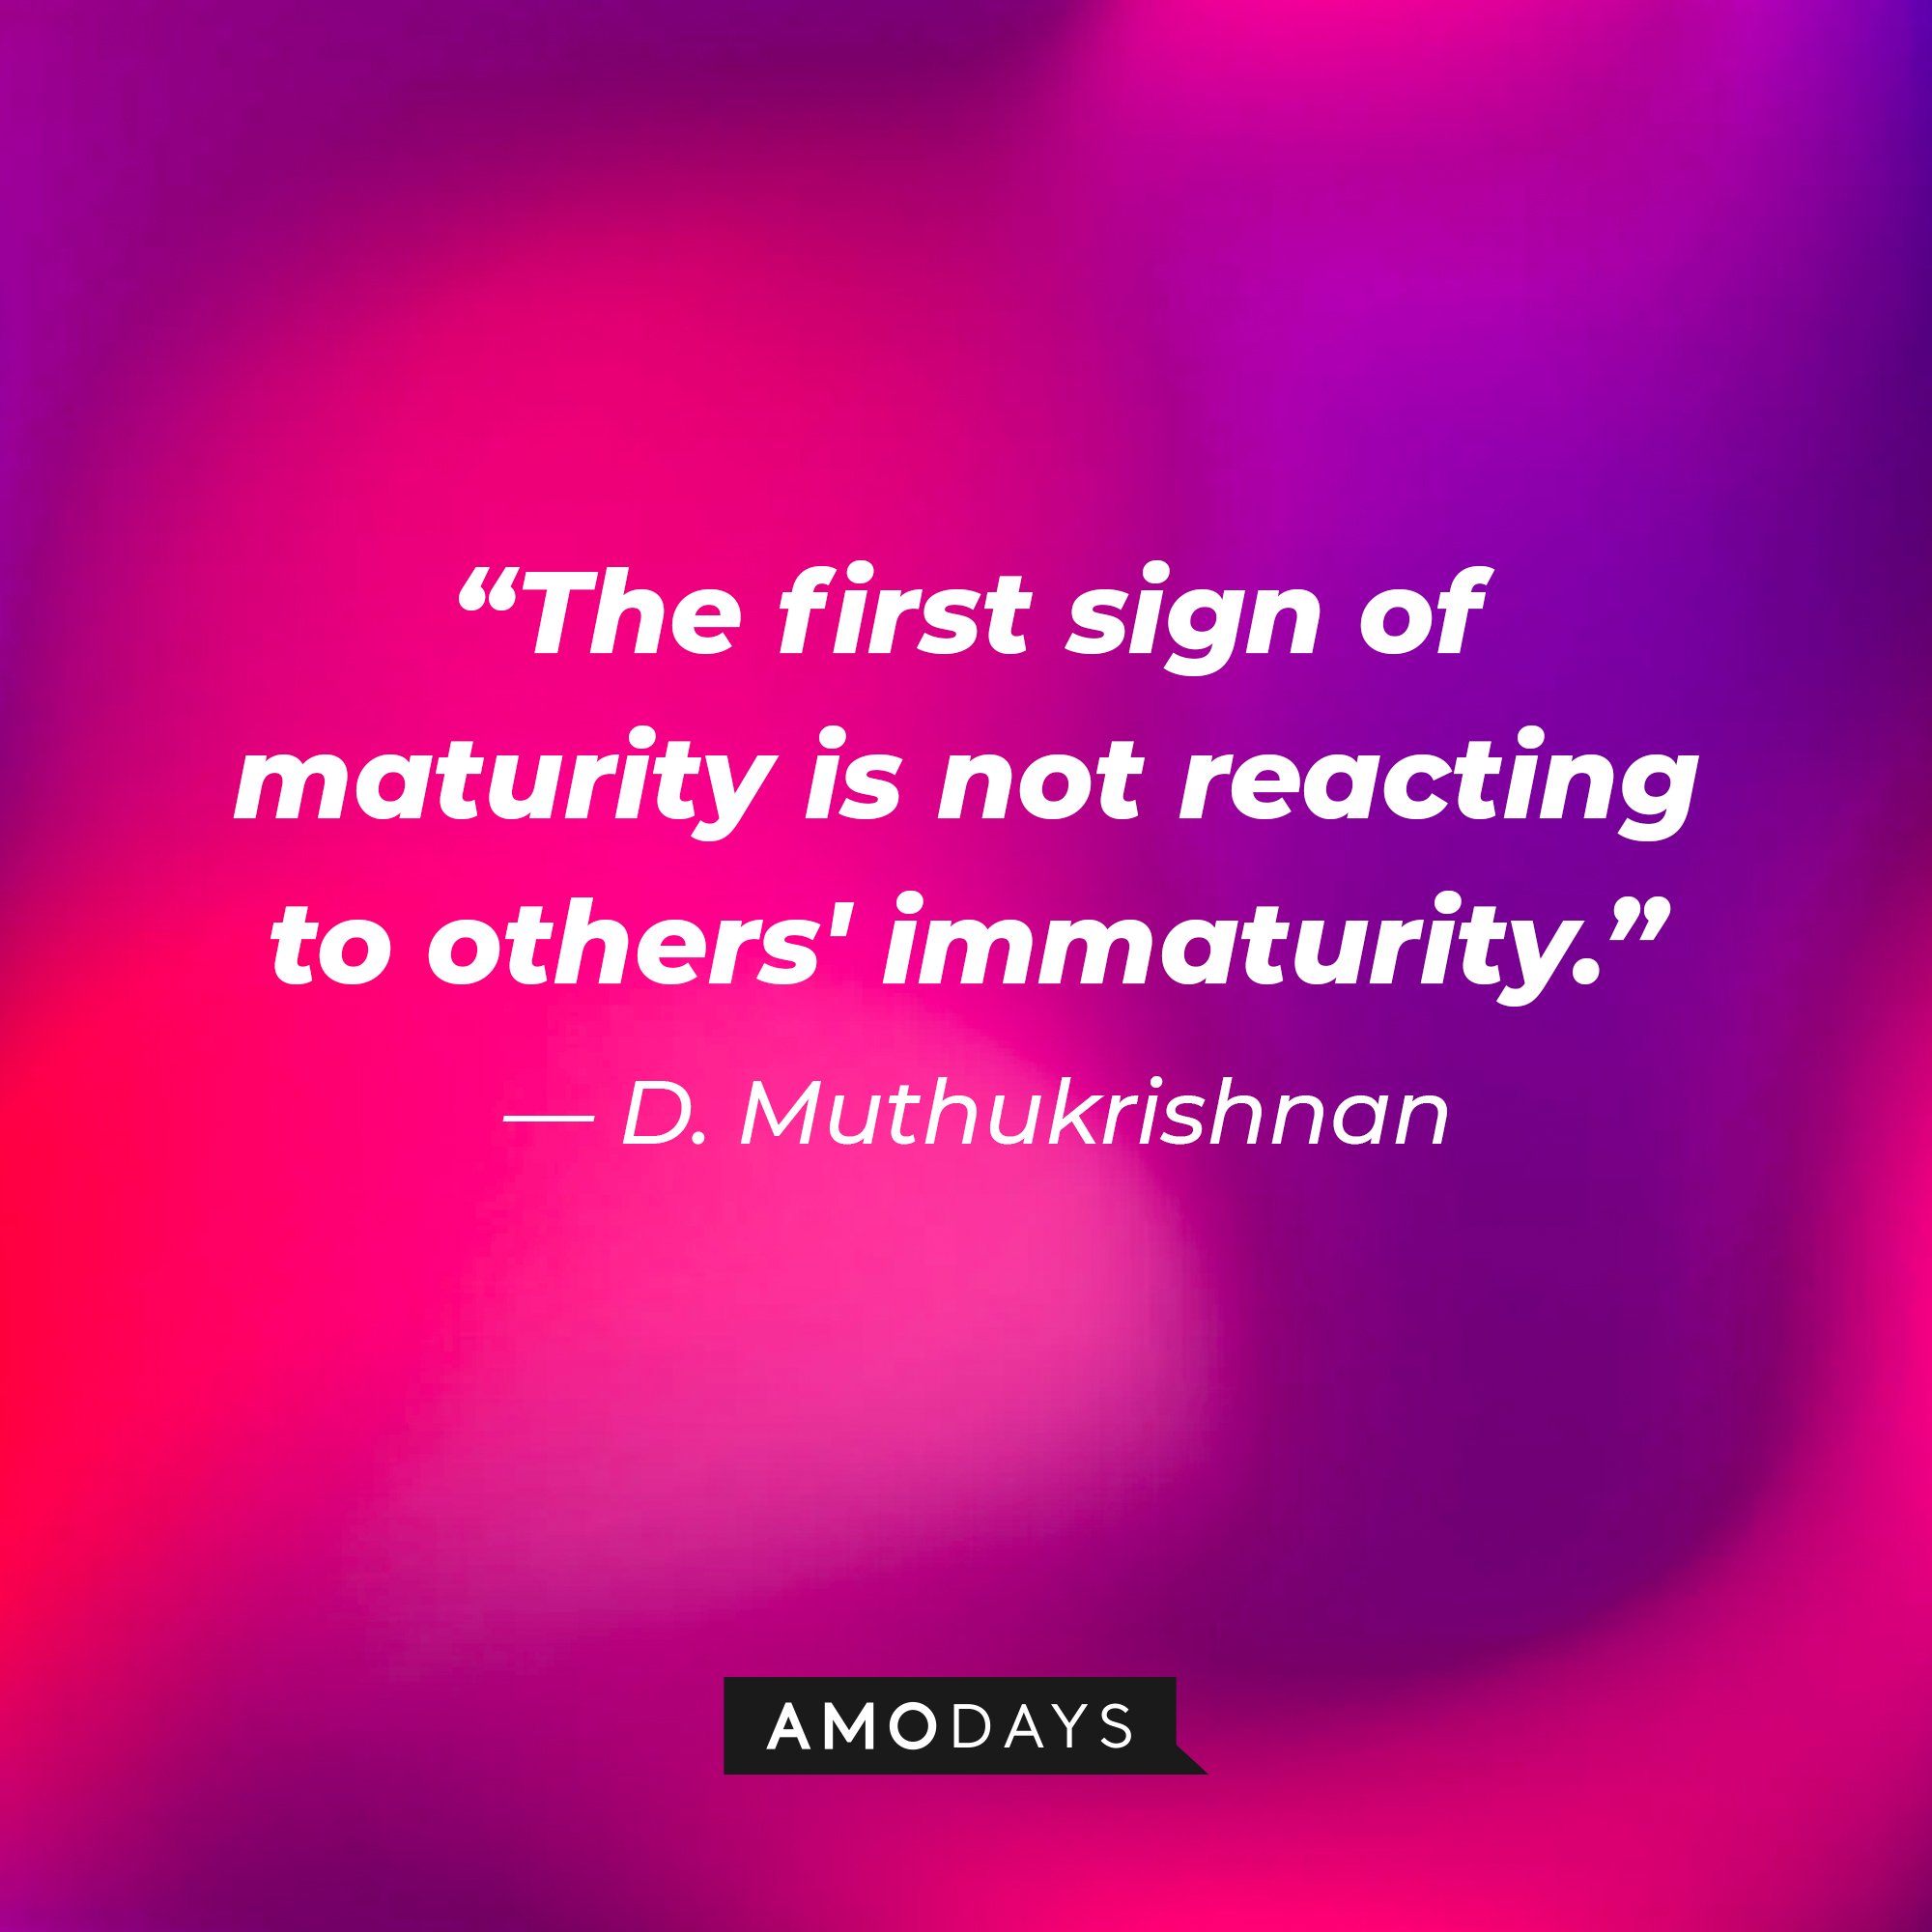 D. Muthukrishnan's quote: “The first sign of maturity is not reacting to others' immaturity.” | Image: AmoDays